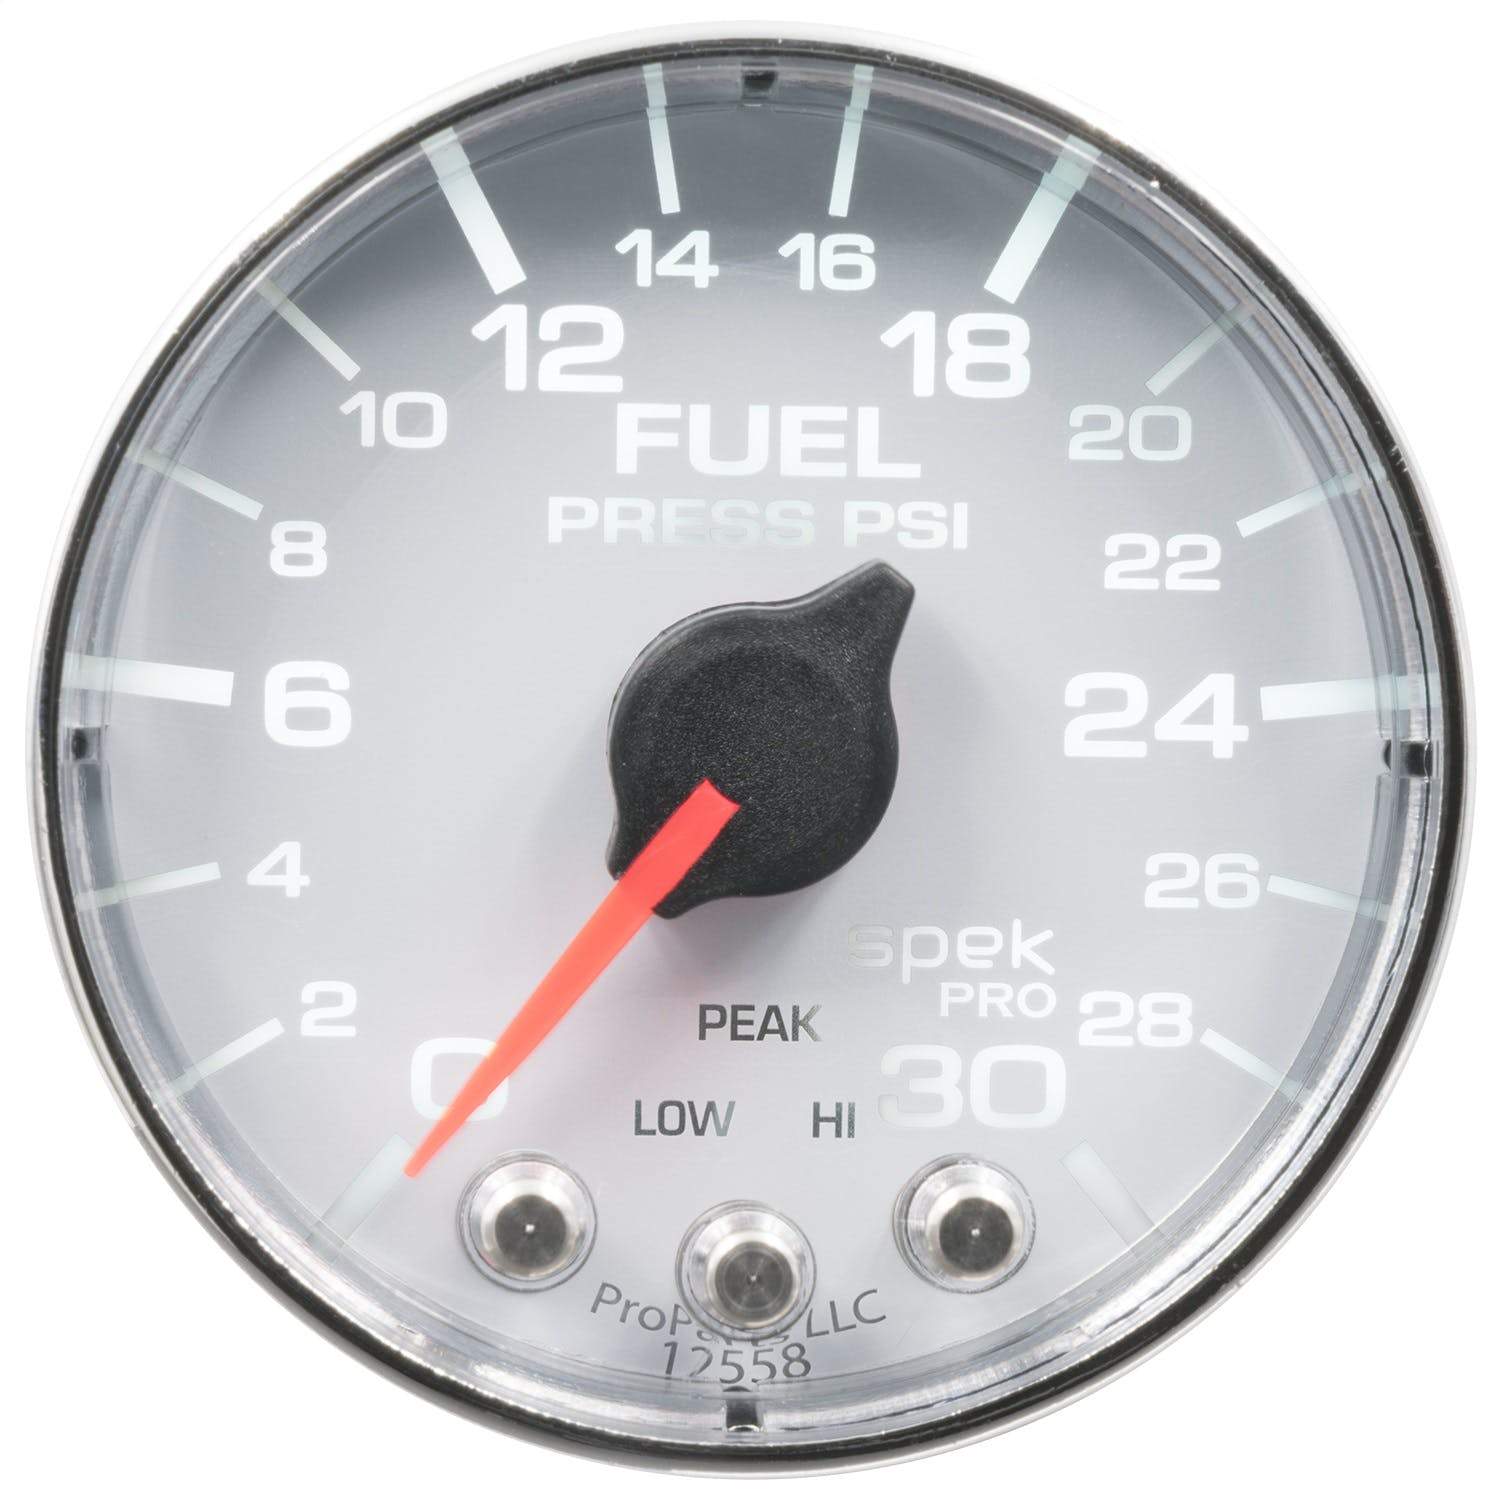 AutoMeter Products P316118 Fuel Press Gauge, 2 1/16, 30PSI, Stepper Motor w/Peak and Warning, White/Chrome